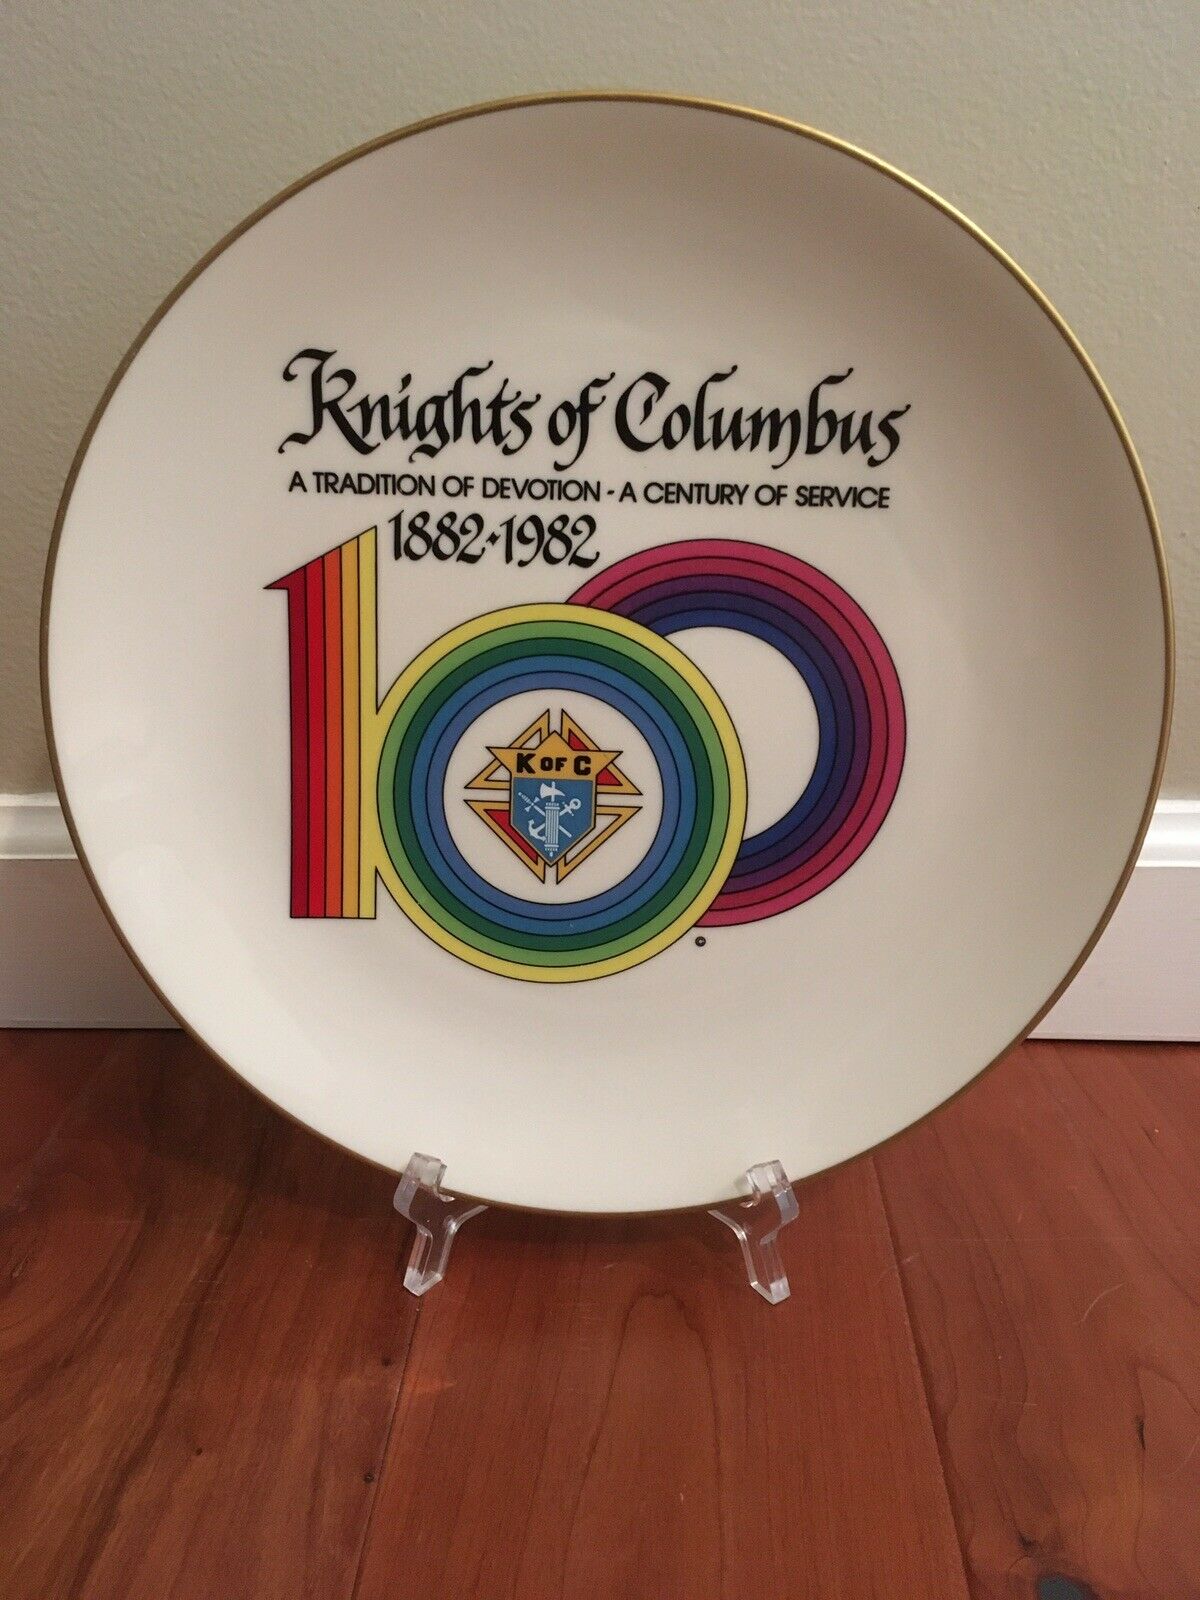 Knights Of Columbus 100 Anniversary Plate 1882 - 1982 Tradition Of Devotion